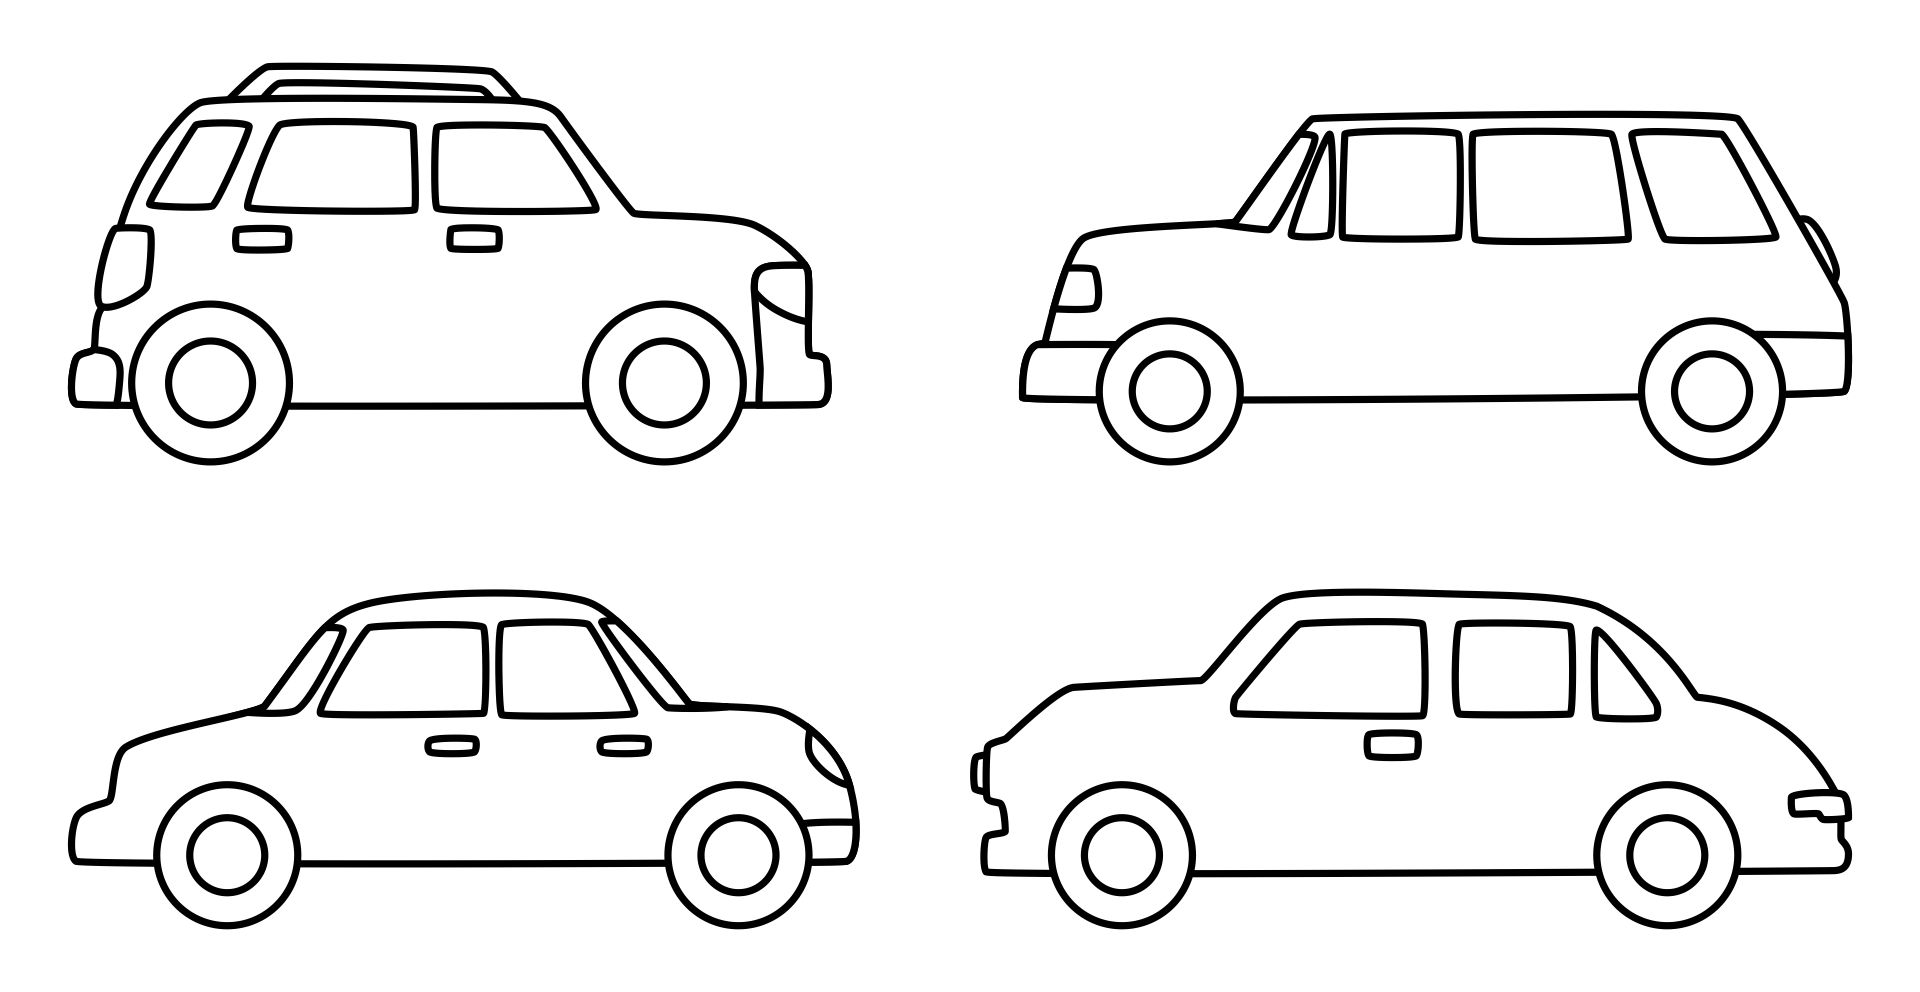 6 Best Images of Car Template Printable For Kids Car Template